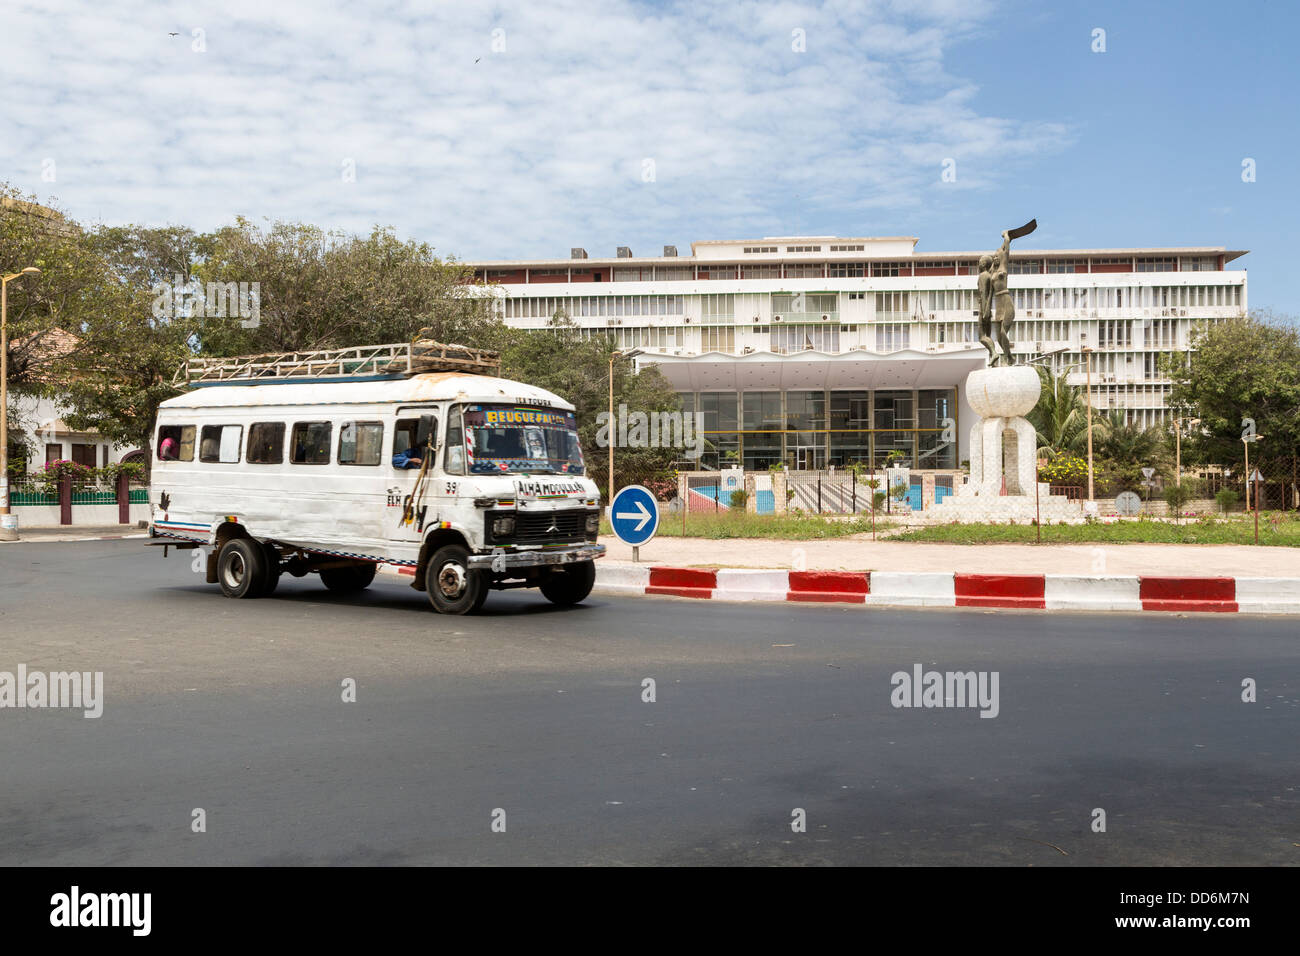 Dakar, Senegal. Soweto Square (Place Soweto) with National Assembly Building in background, local transport bus in foreground. Stock Photo